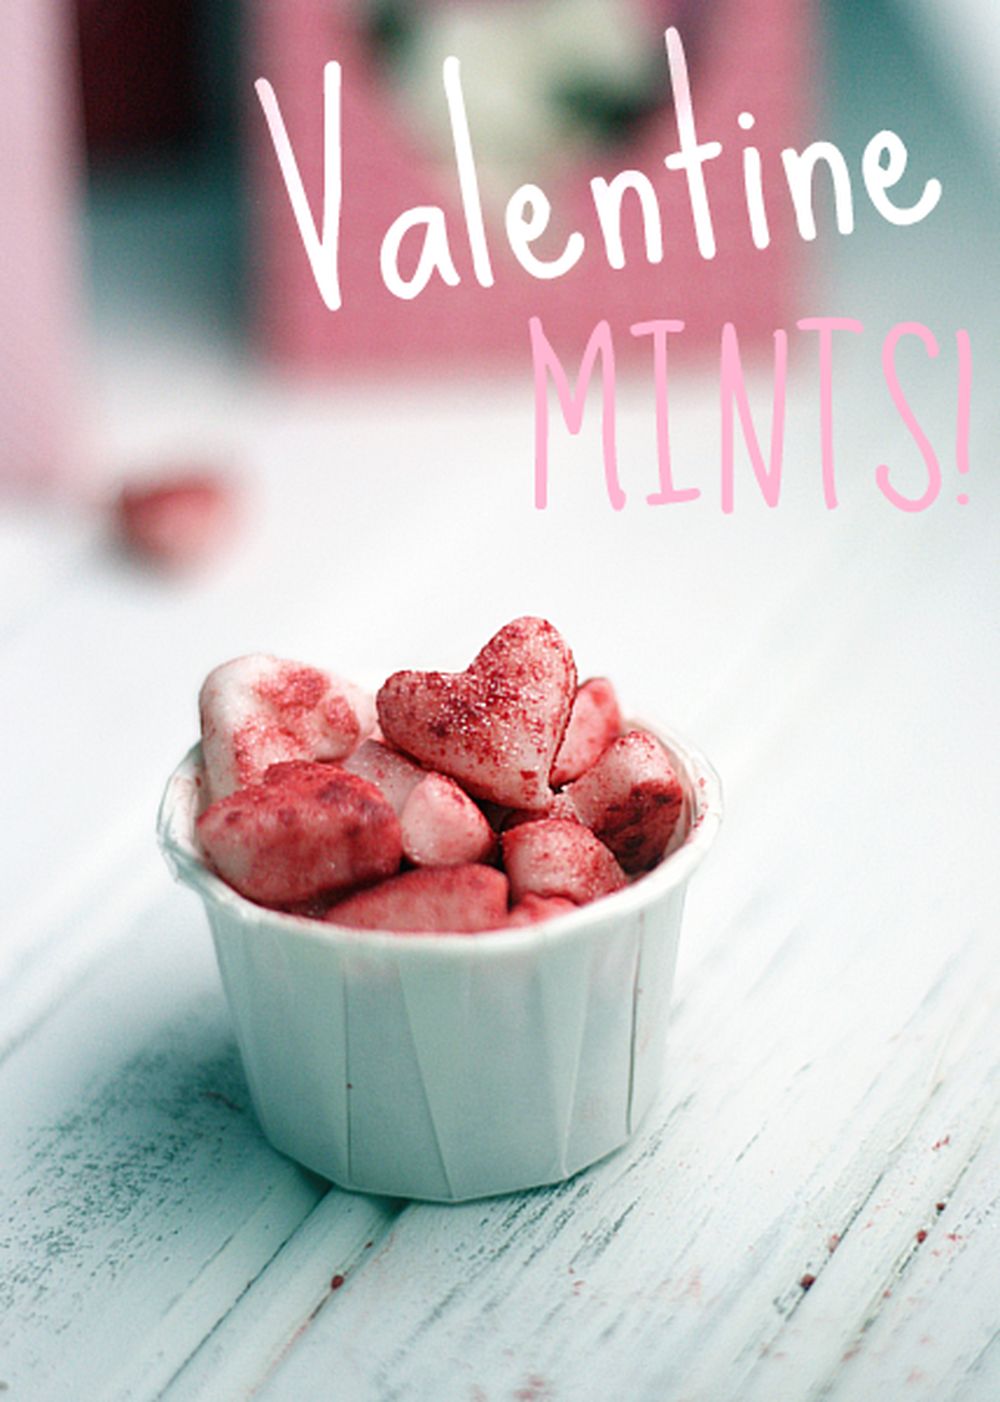 Homemade mints edible valentine’s day gifts